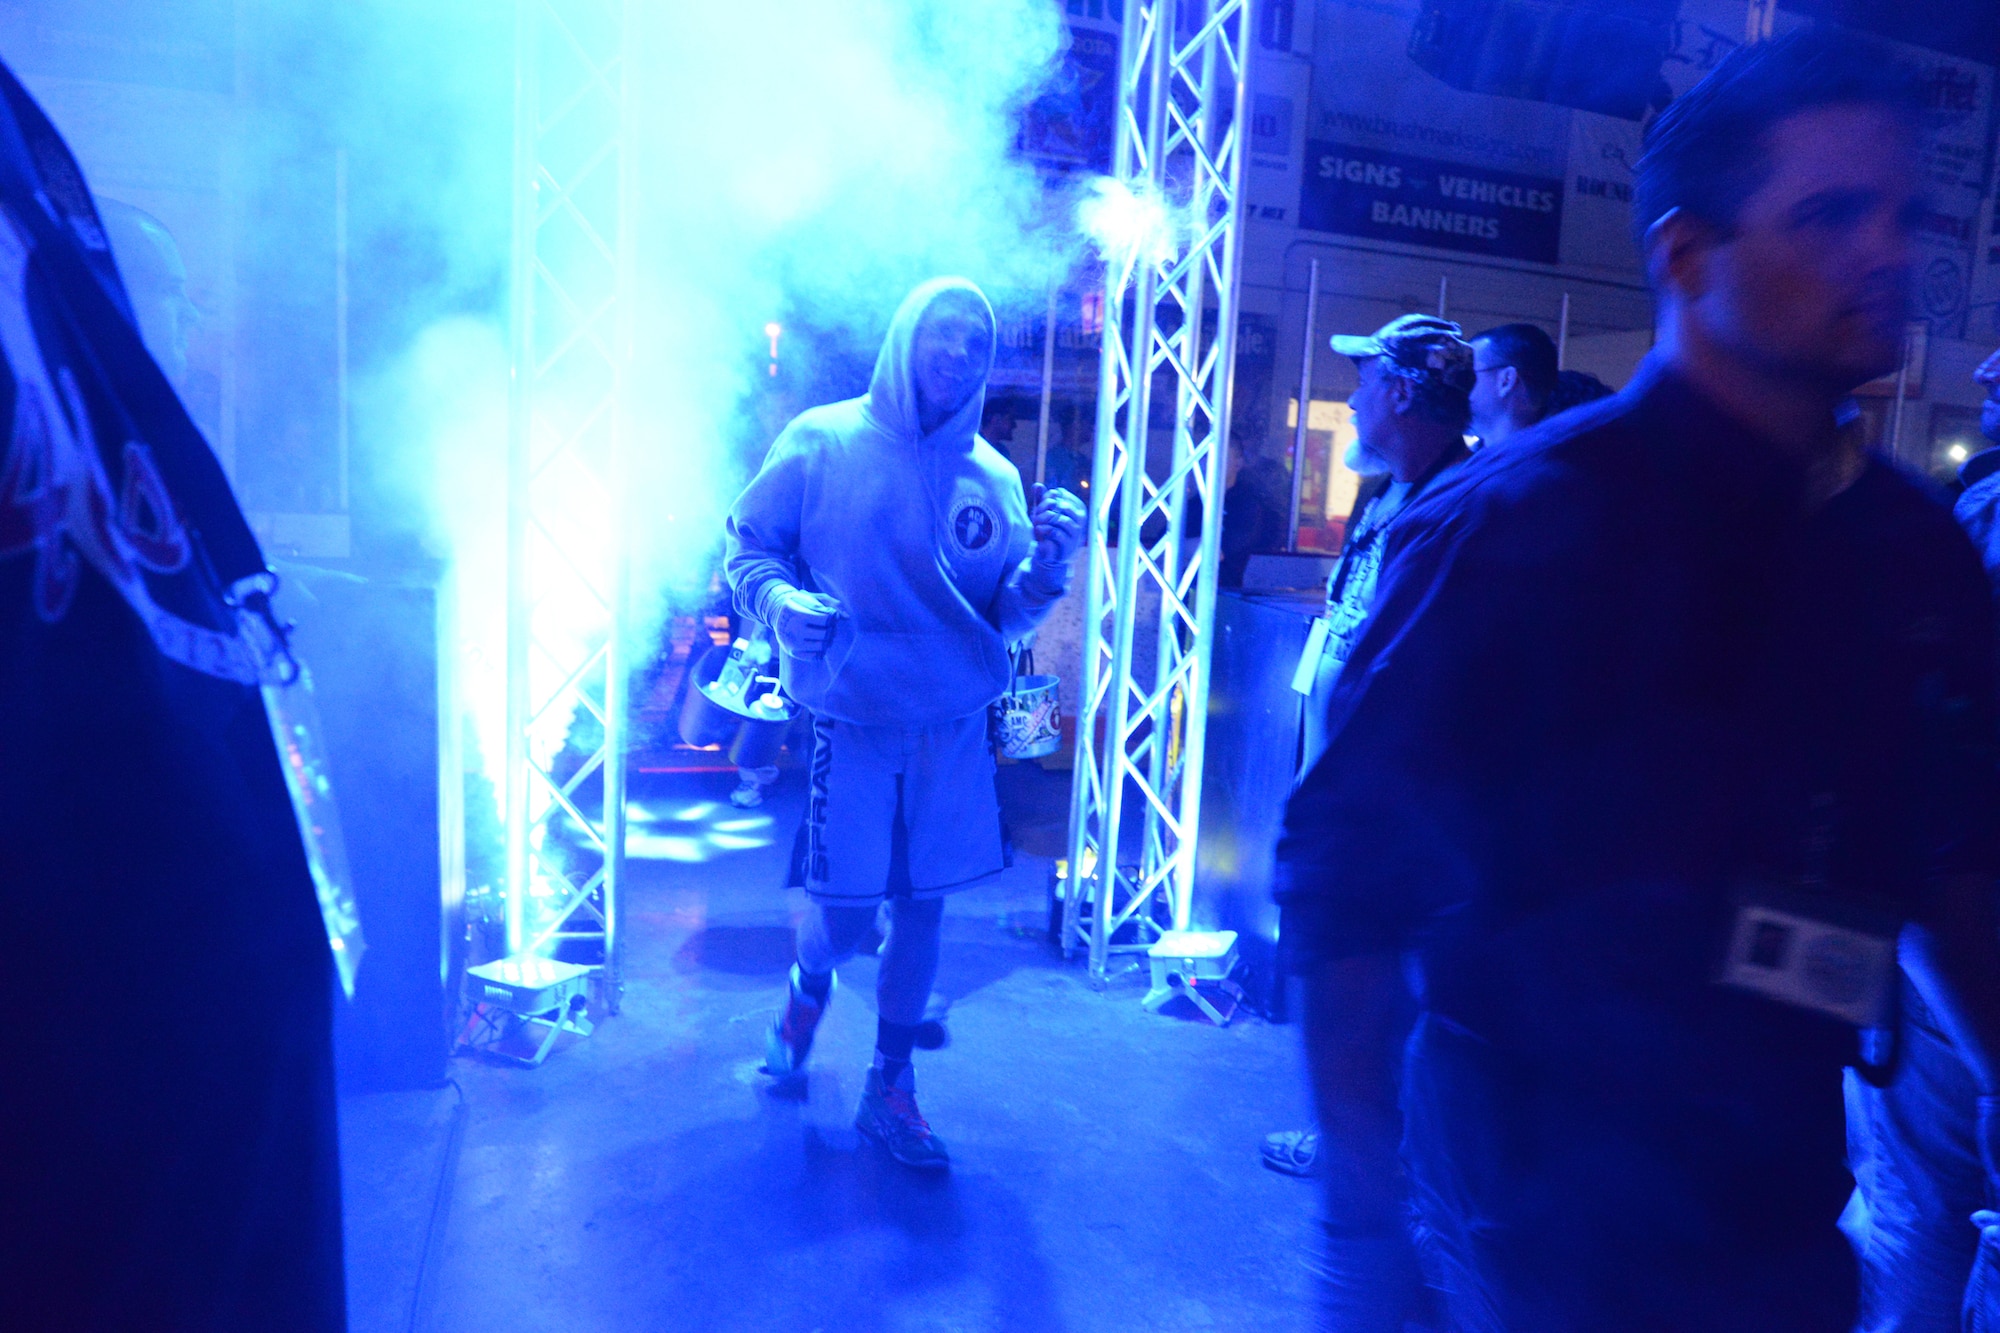 Senior Airman Michael Bullen, of the 119th Security Forces Squadron, makes a s smoky entrance through the dimly lit crowd leading to the center stage fighting cage where he will compete in a mixed martial arts fight at the Freeman Arena, Detroit Lakes, Minnesota, May 16, 2015.  The security forces Airman uses mixed martial arts training and fighting to enhance his fitness and skills to be better prepared in his career field and to be better prepared for potential threats on duty.  (U.S. Air National Guard photo by Senior Master Sgt. David H. Lipp/Released)